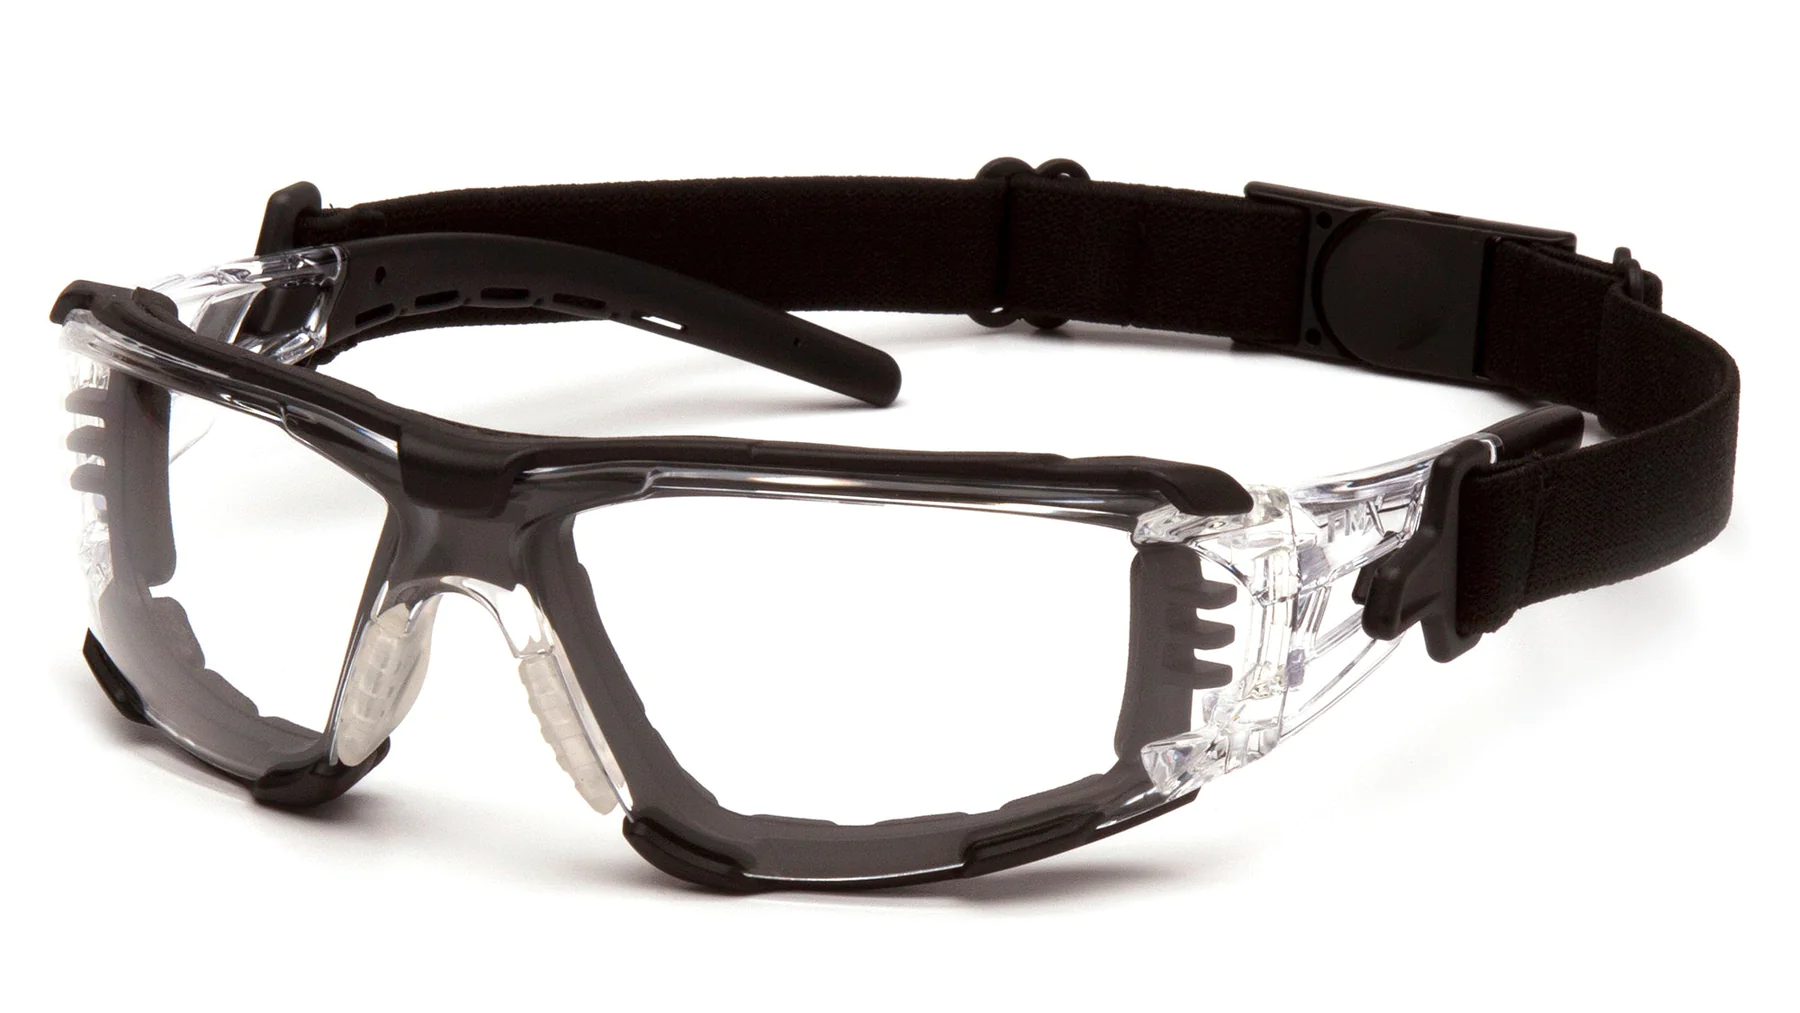 Pyramex Fyxate H2MAX Anti-Fog Lens Safety Glasses with Foam Pads from Columbia Safety